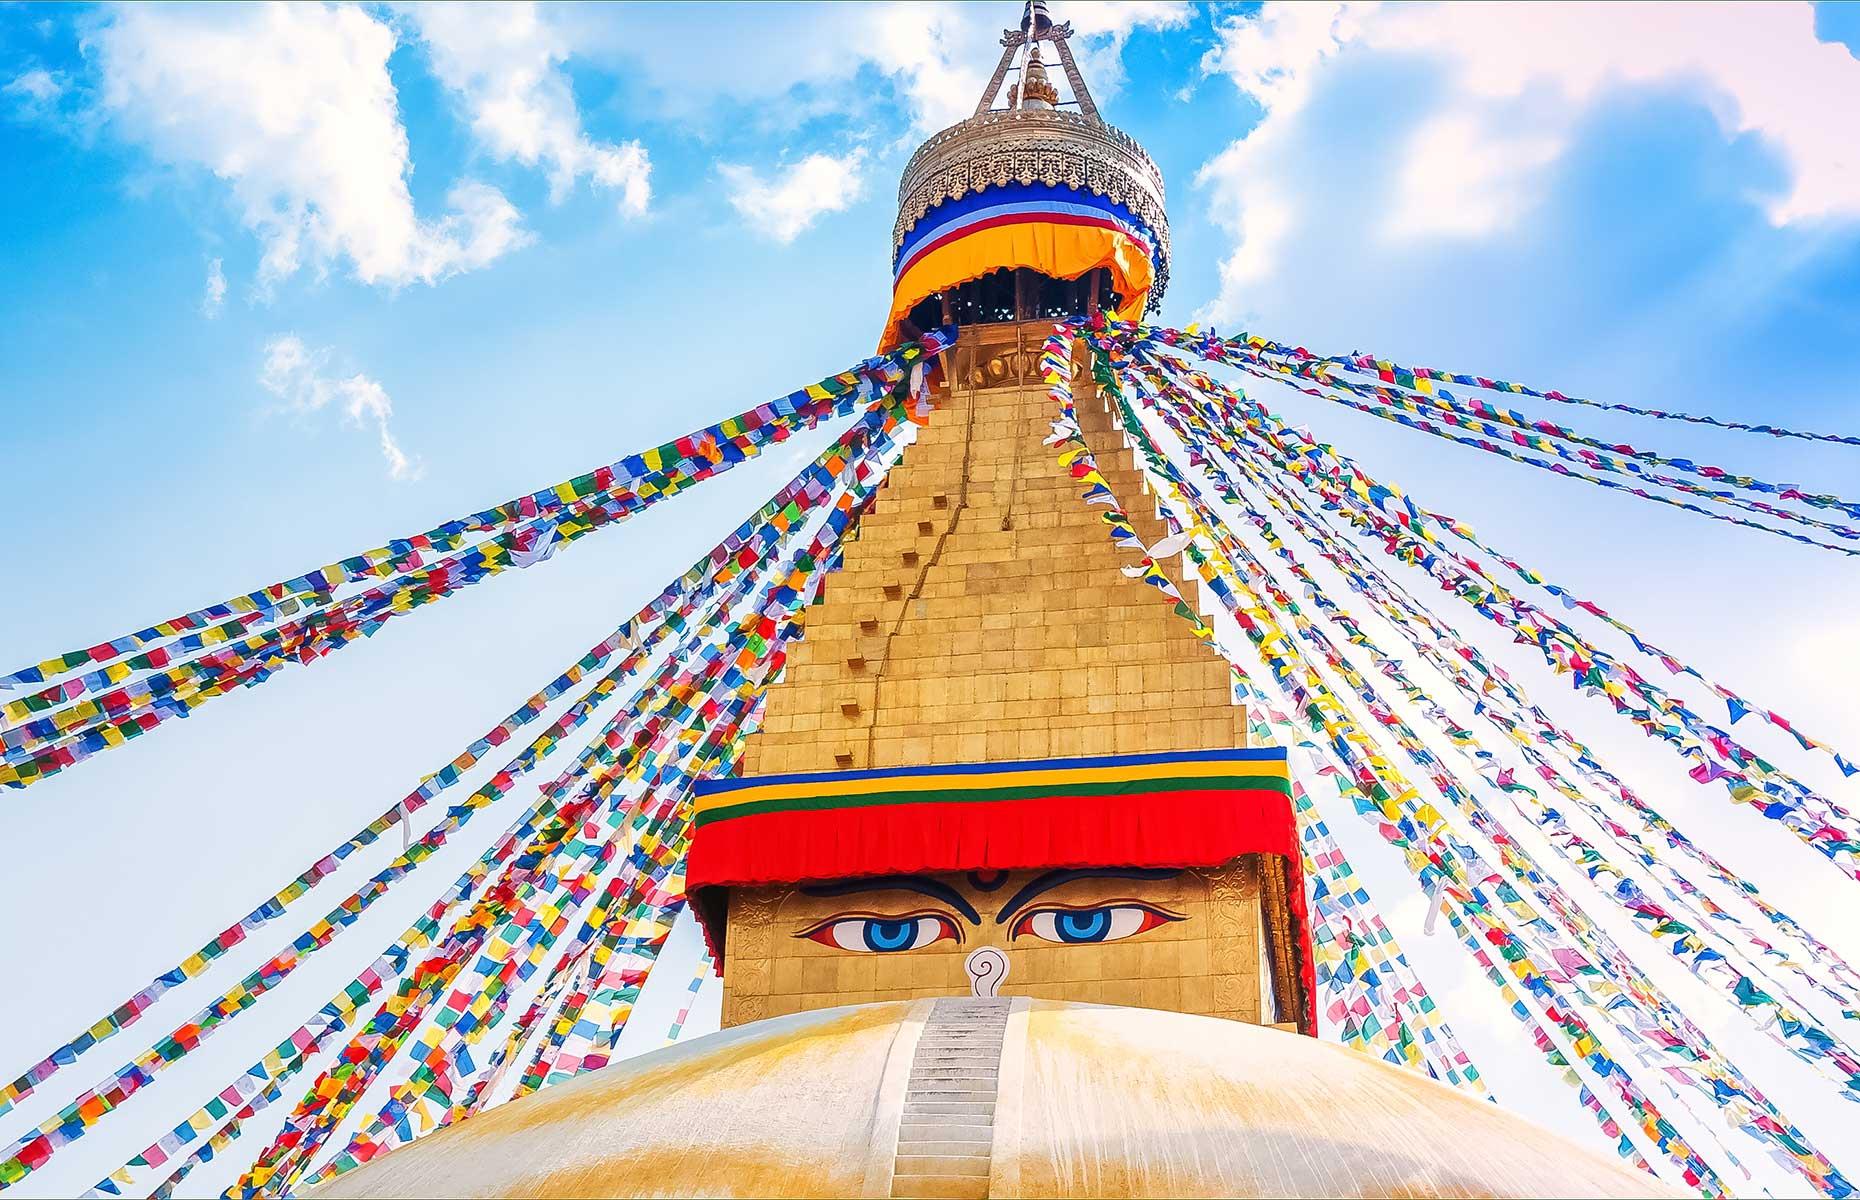 <p>Tourist hotspots like Boudhanath Stupa in Kathmandu (pictured) have <a href="https://www.euronews.com/travel/2022/10/27/tiktok-banned-at-buddhas-birthplace-and-other-tourist-hotspots-in-nepal">banned TikTokers from making videos</a> in an effort to restore peace and diminish selfie-taking crowds. Religious sites like Ram Janaki Temple in Janakpur and Gadhimai temple in Bara now feature ‘no TikTok’ signs, with posing, dancing and playing loud music blamed for disrupting the areas. In 2021, Boudhanath Stupa even installed CCTV cameras and patrolling security guards to ward off nuisance from influencers.</p>